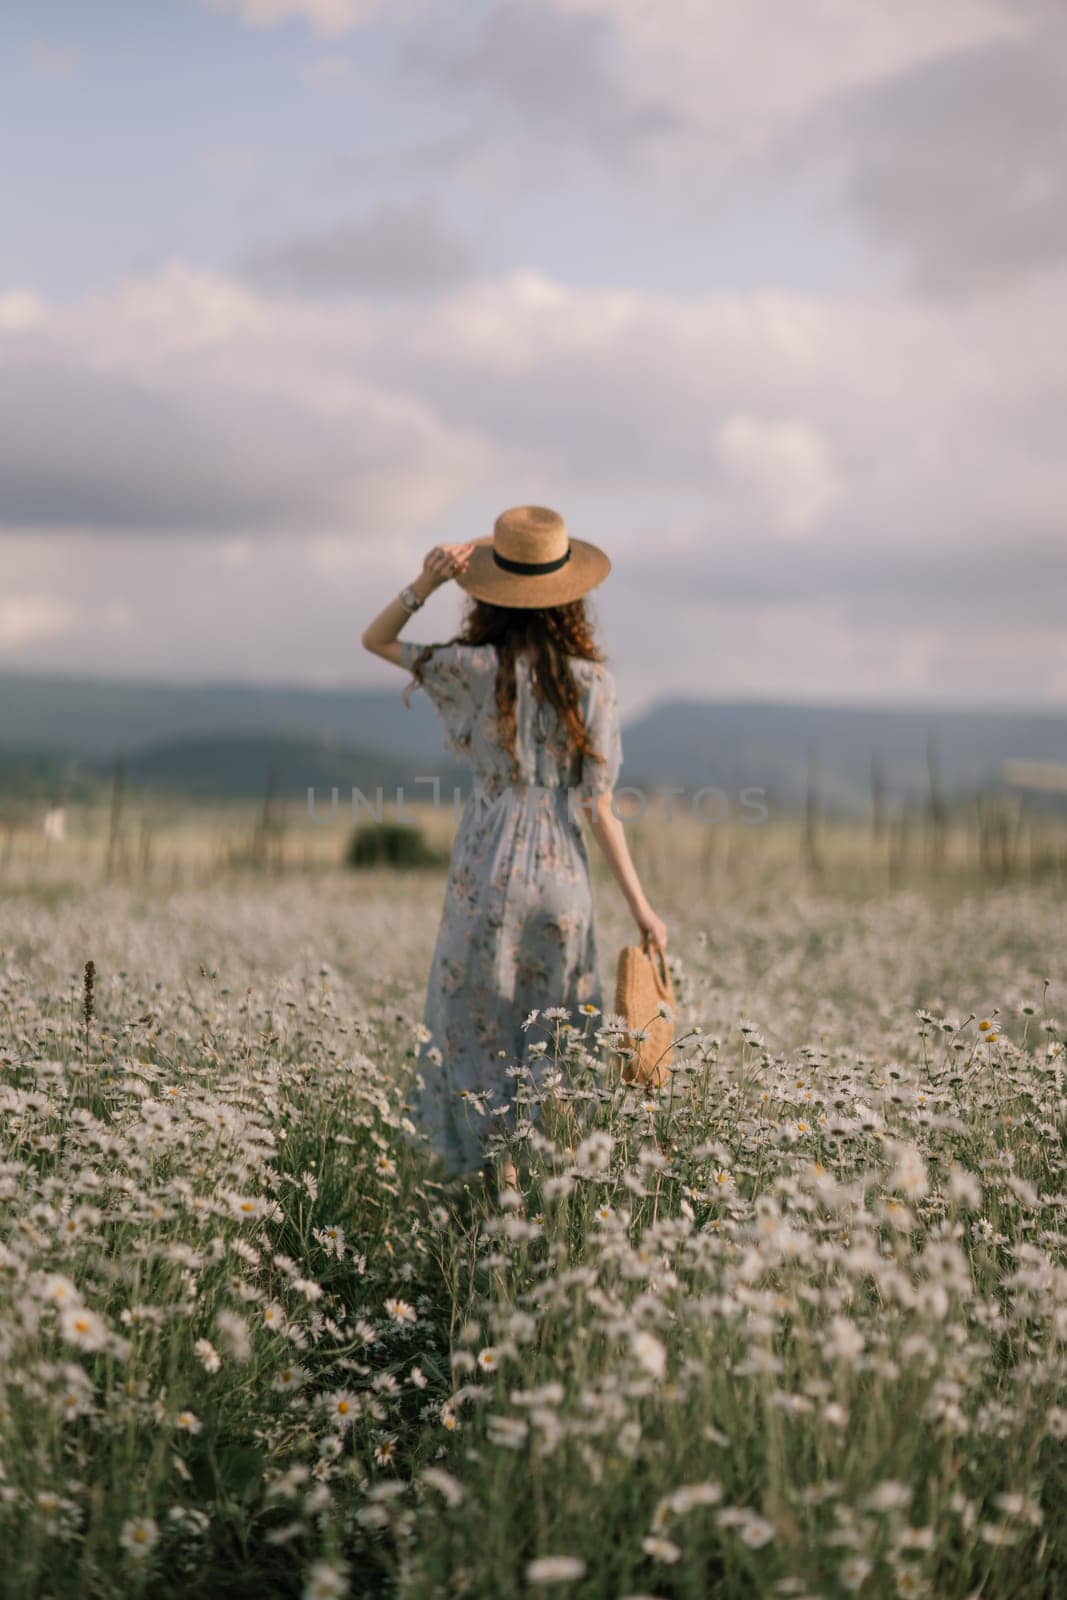 A woman is walking through a field of flowers, wearing a straw hat and carrying a basket. The scene is peaceful and serene, with the woman standing in the middle of the field by Matiunina